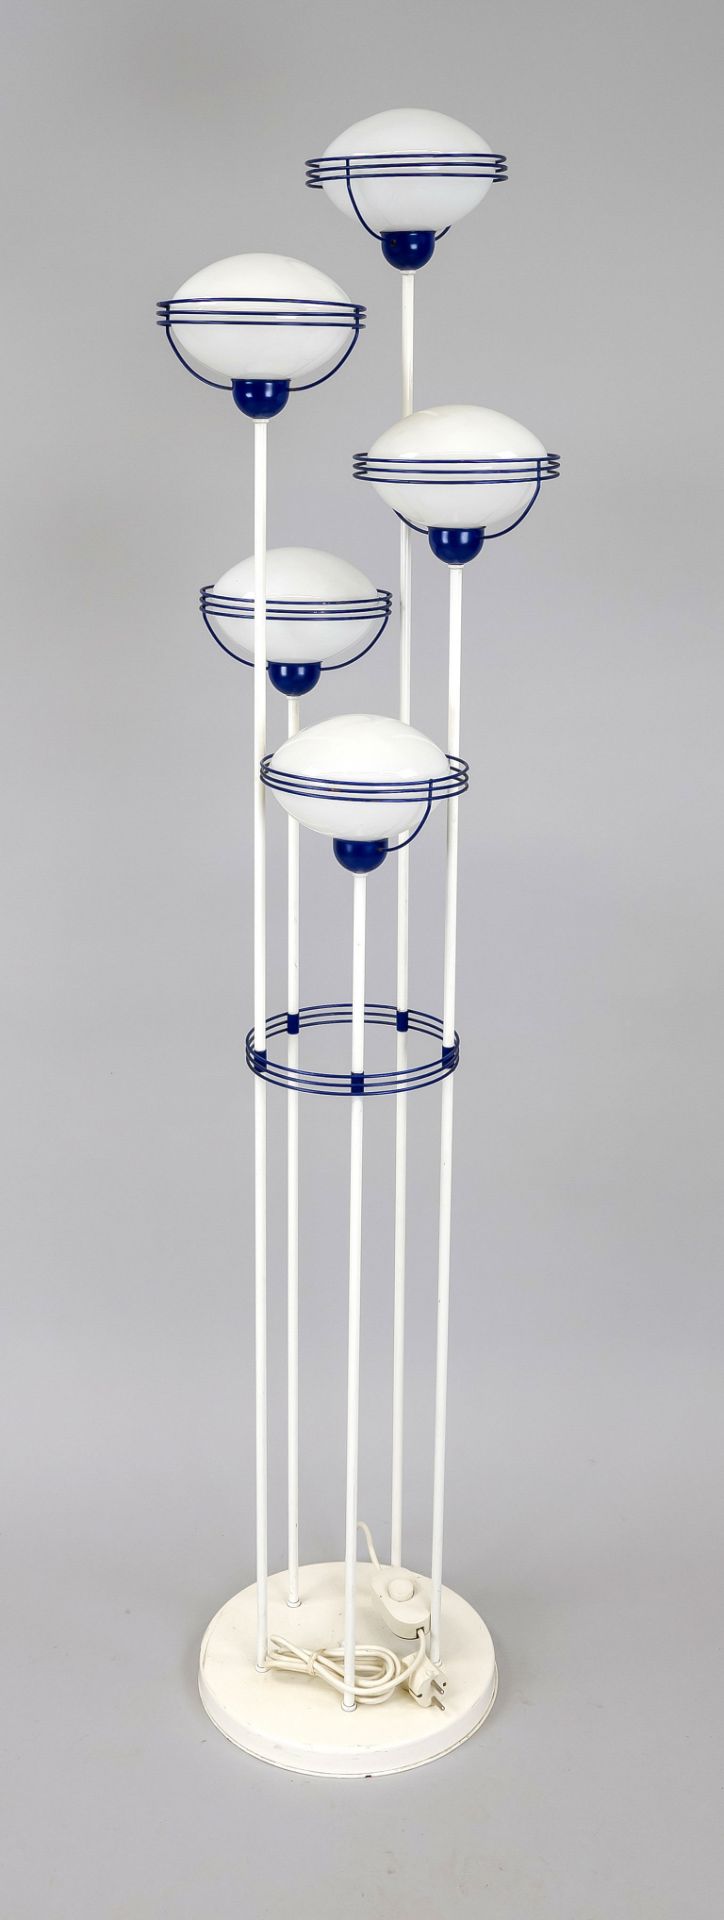 Designer floor lamp, probably 1980s. 5 slender shafts with frosted glass lampshades in various